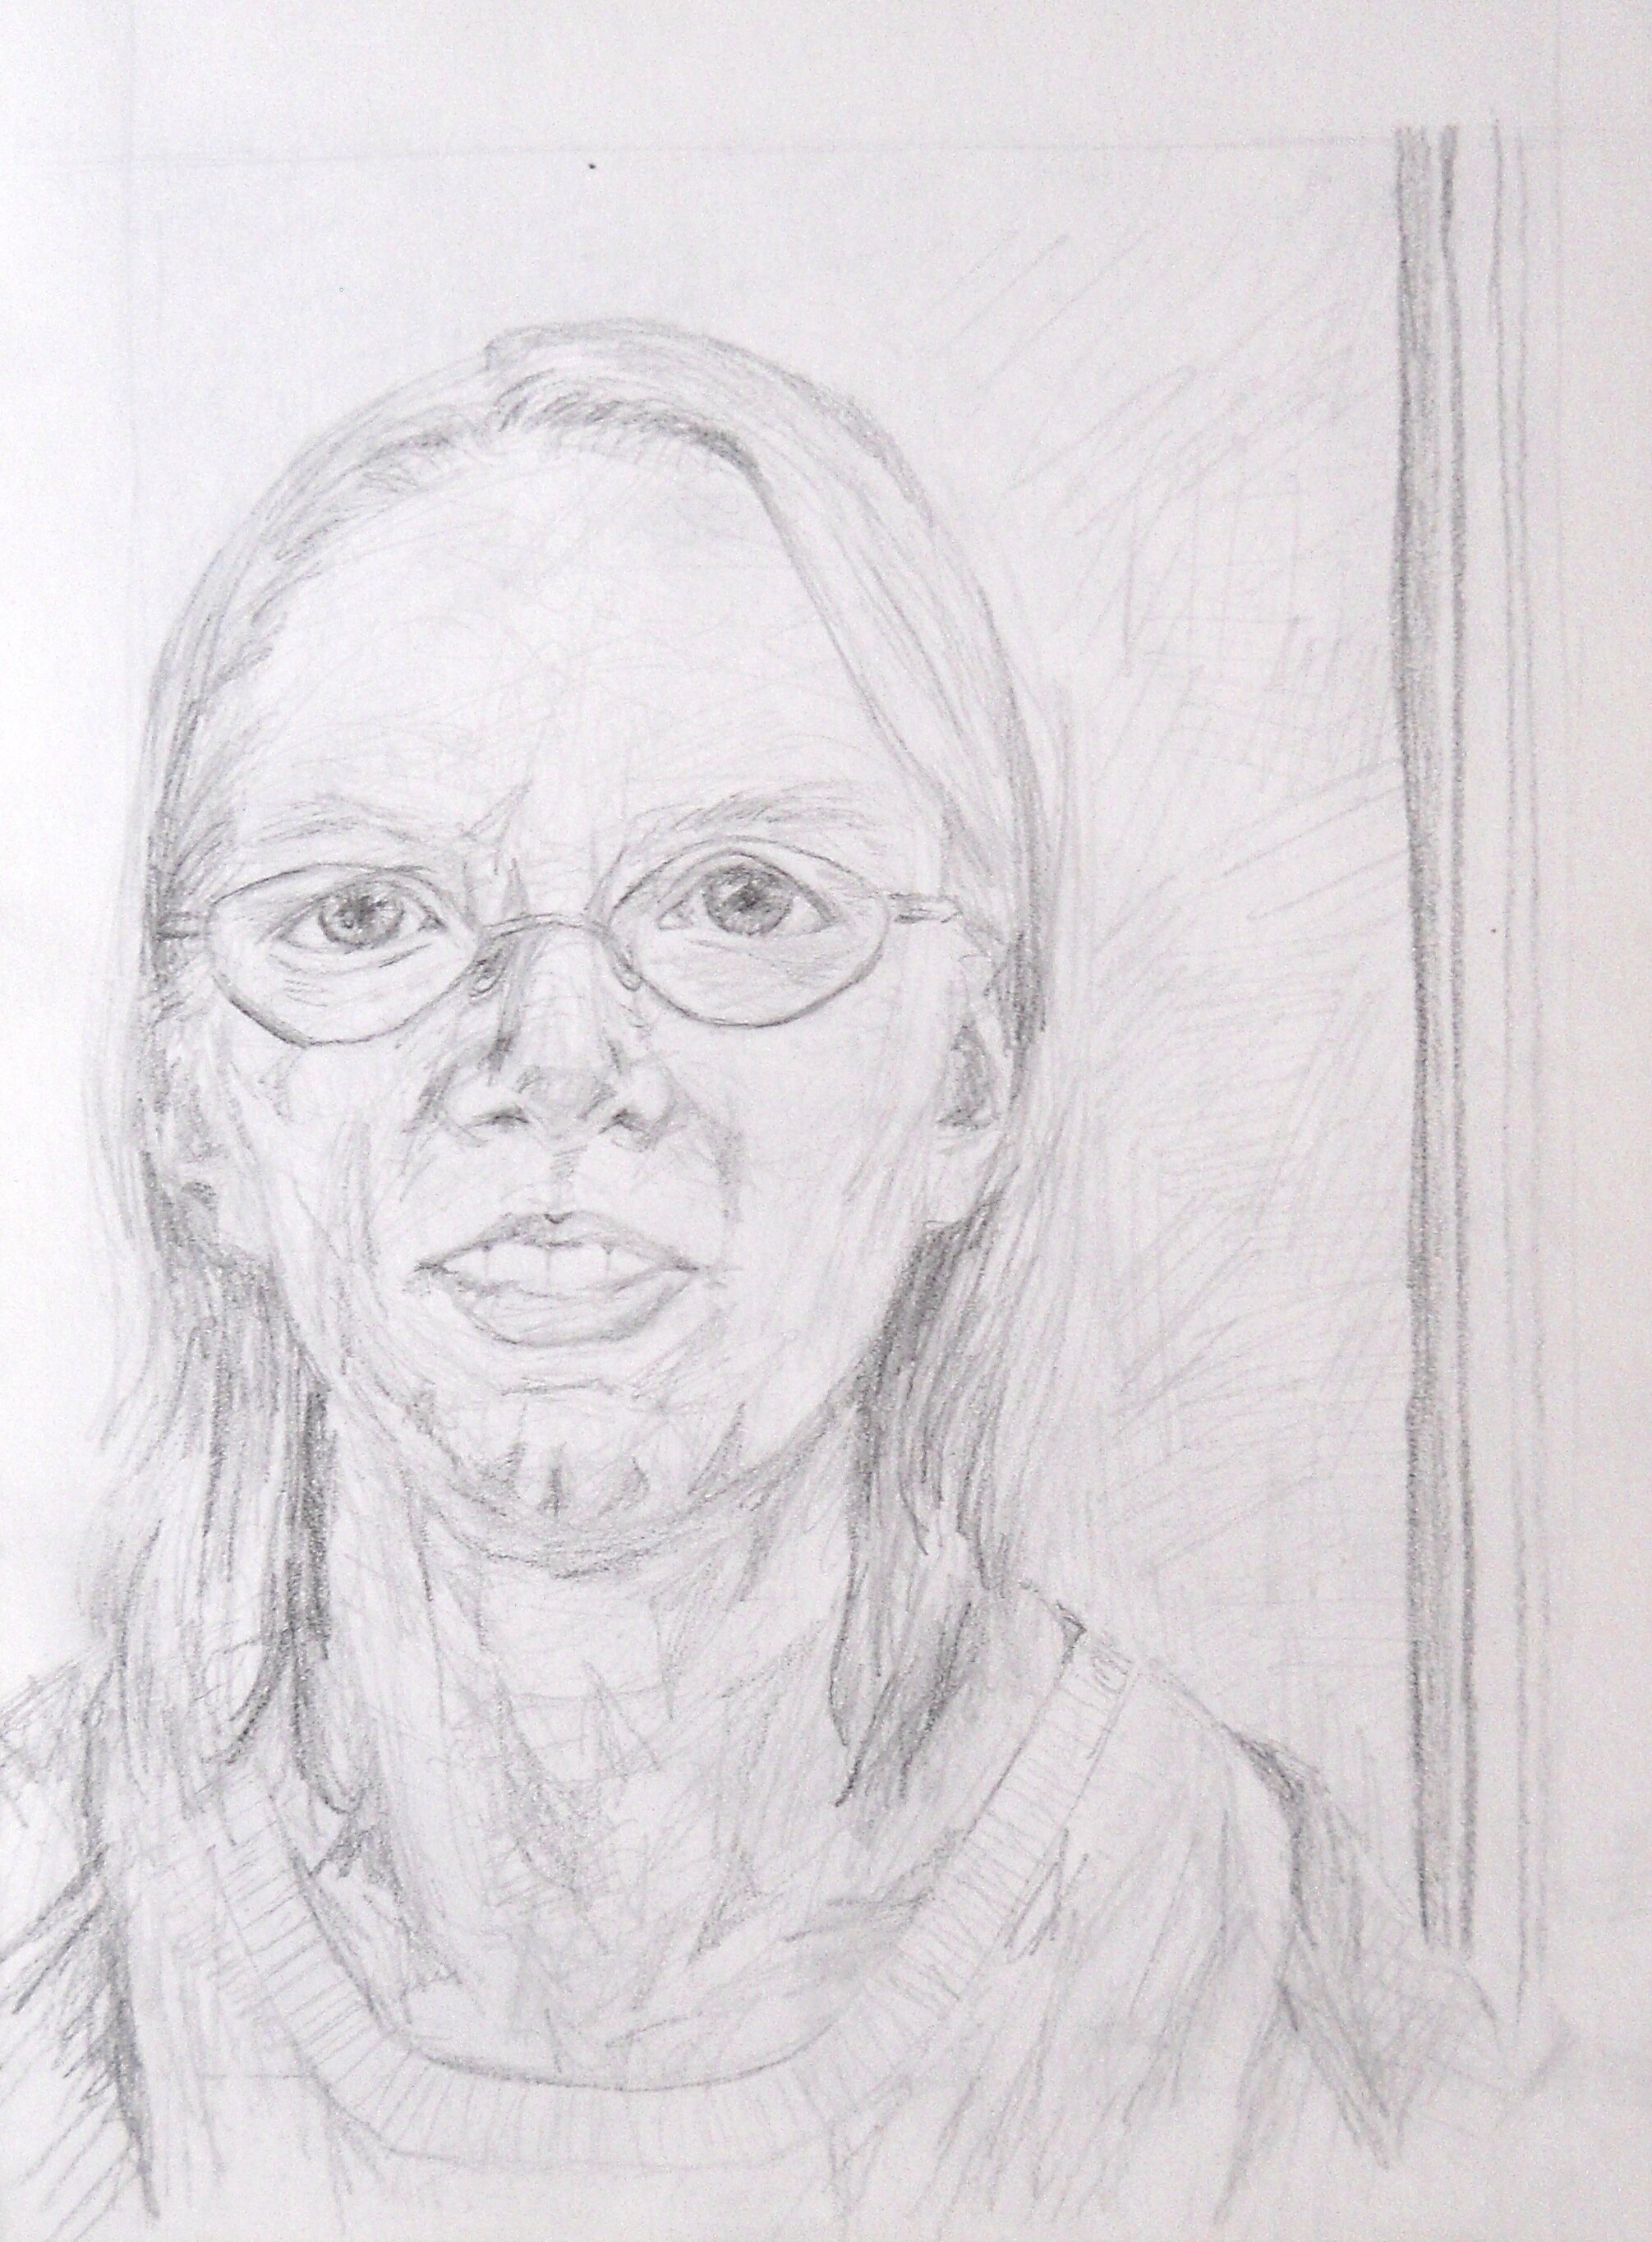  Graphite on paper, from life.  Circa 2007.  “Drawn in conversation” series 